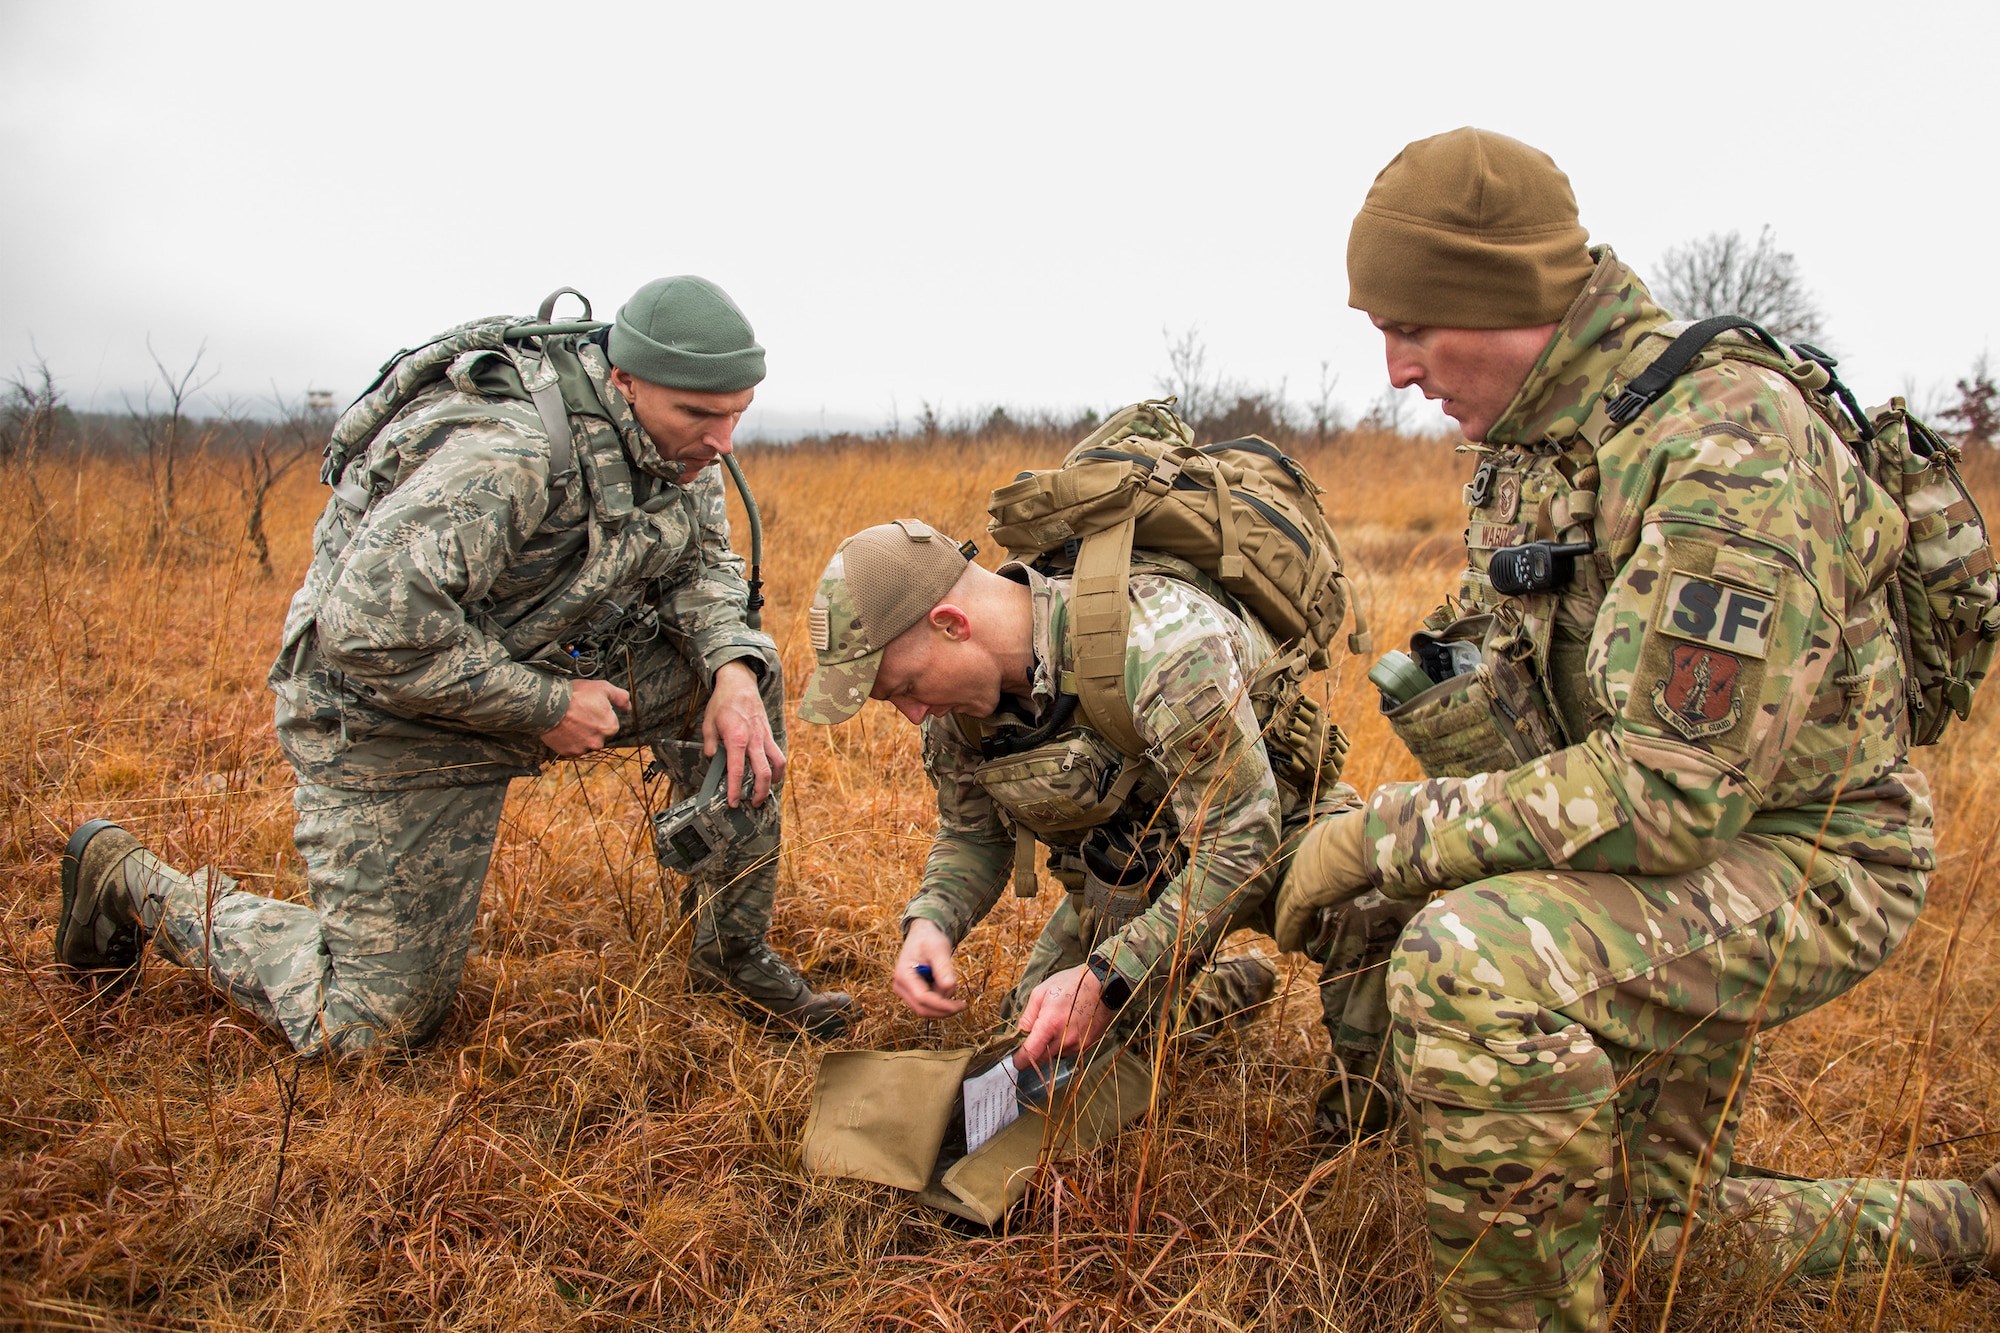 Senior Master Sgt. Bradley Rose, 185th Security Forces Squadron, left, Staff Sgt. Jonathan Finer, 124th SFS, and Master Sgt. Gregory Wardle, 153rd SFS, tackle a land navigation element Jan. 23, 2020, at Fort Chaffee, Arkansas. The team of Airmen from across the Air National Guard gathered to train for the Air Force Defender Challenge, a security forces skills competition held in May at Joint Base San Antonio-Camp Bullis, Texas.